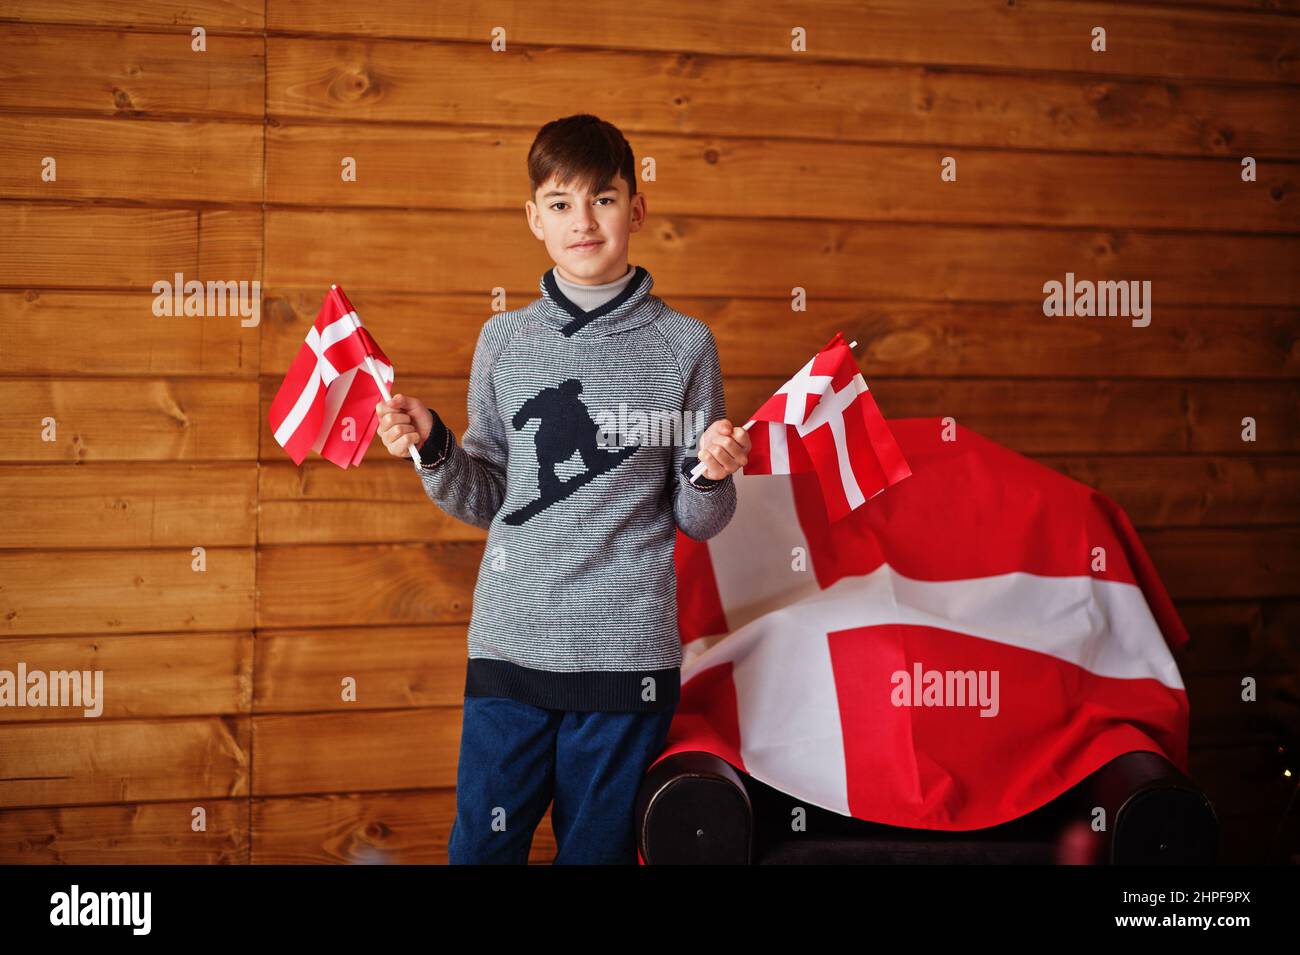 Boy with Denmark flags. Travel to Scandinavian countries. Happiest danish people's . Stock Photo